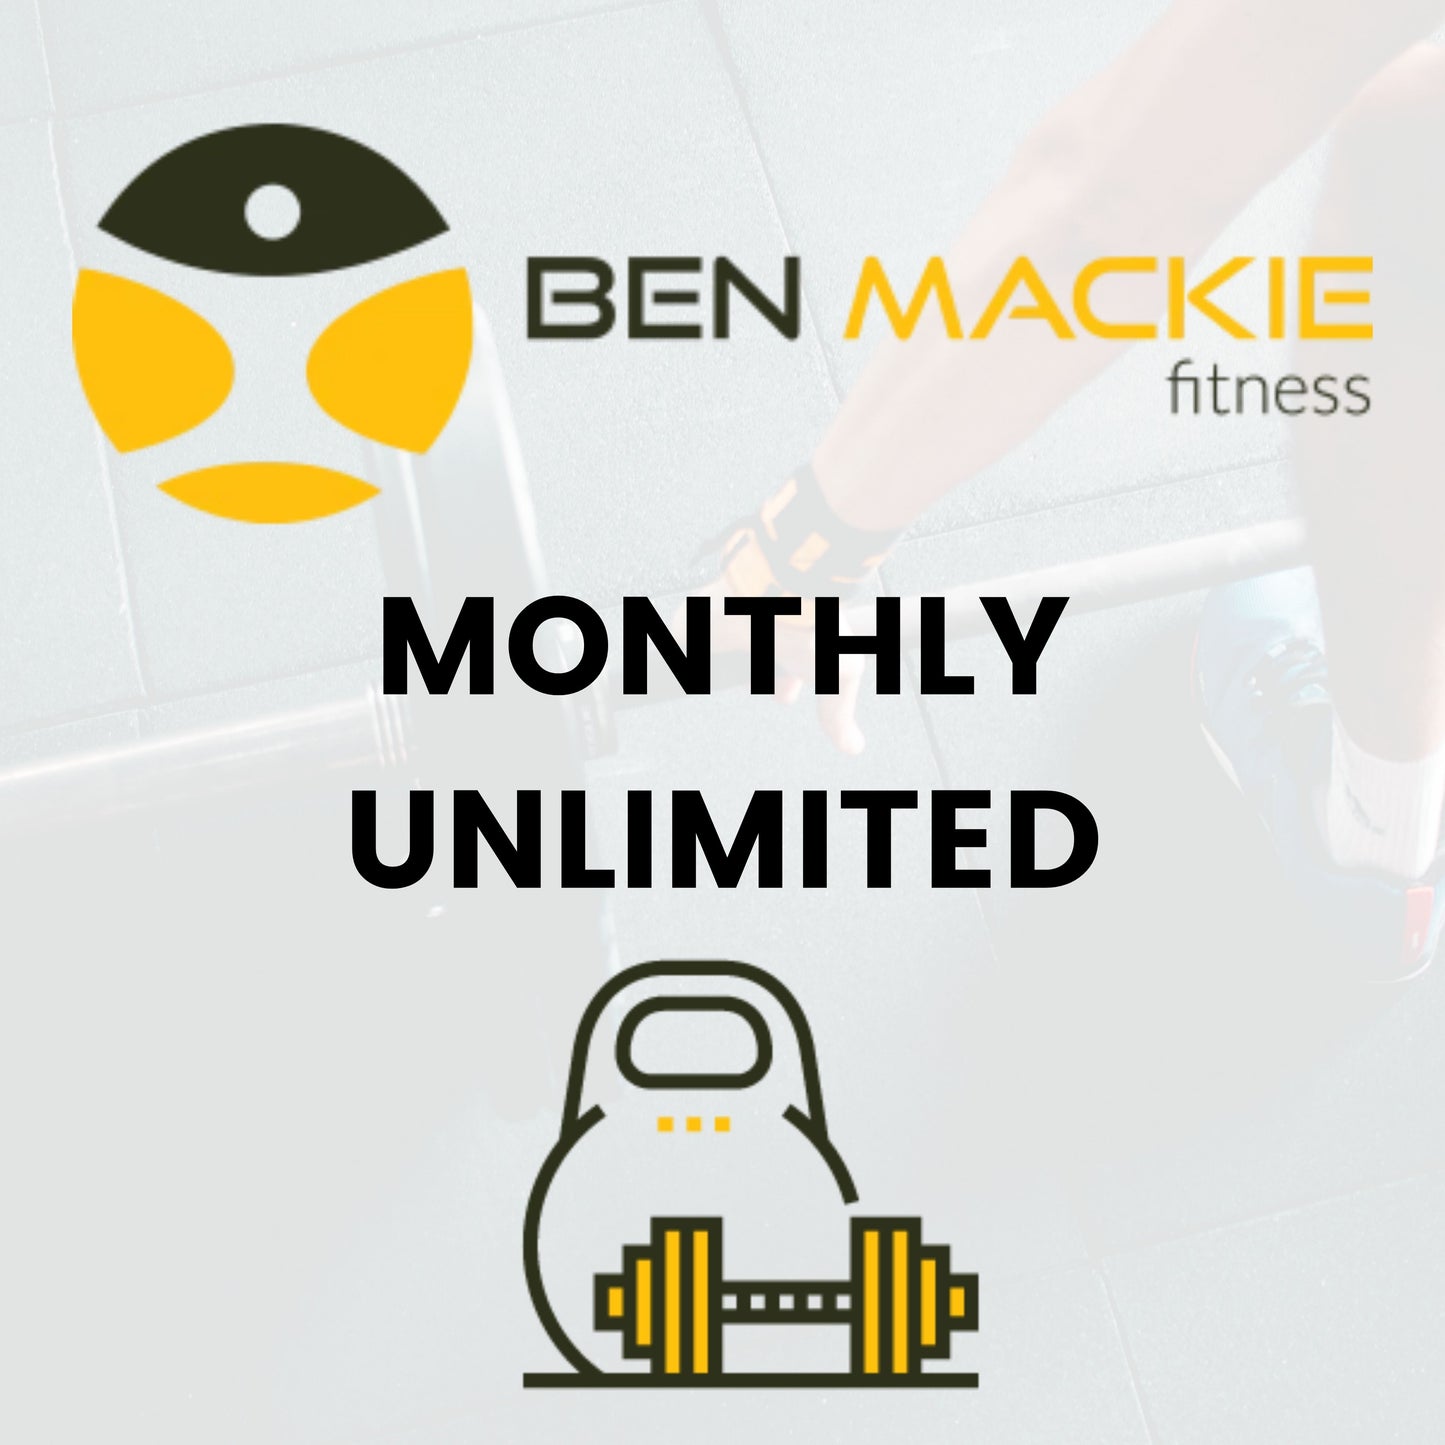 Ben Mackie Unlimited Fitness (Annual)